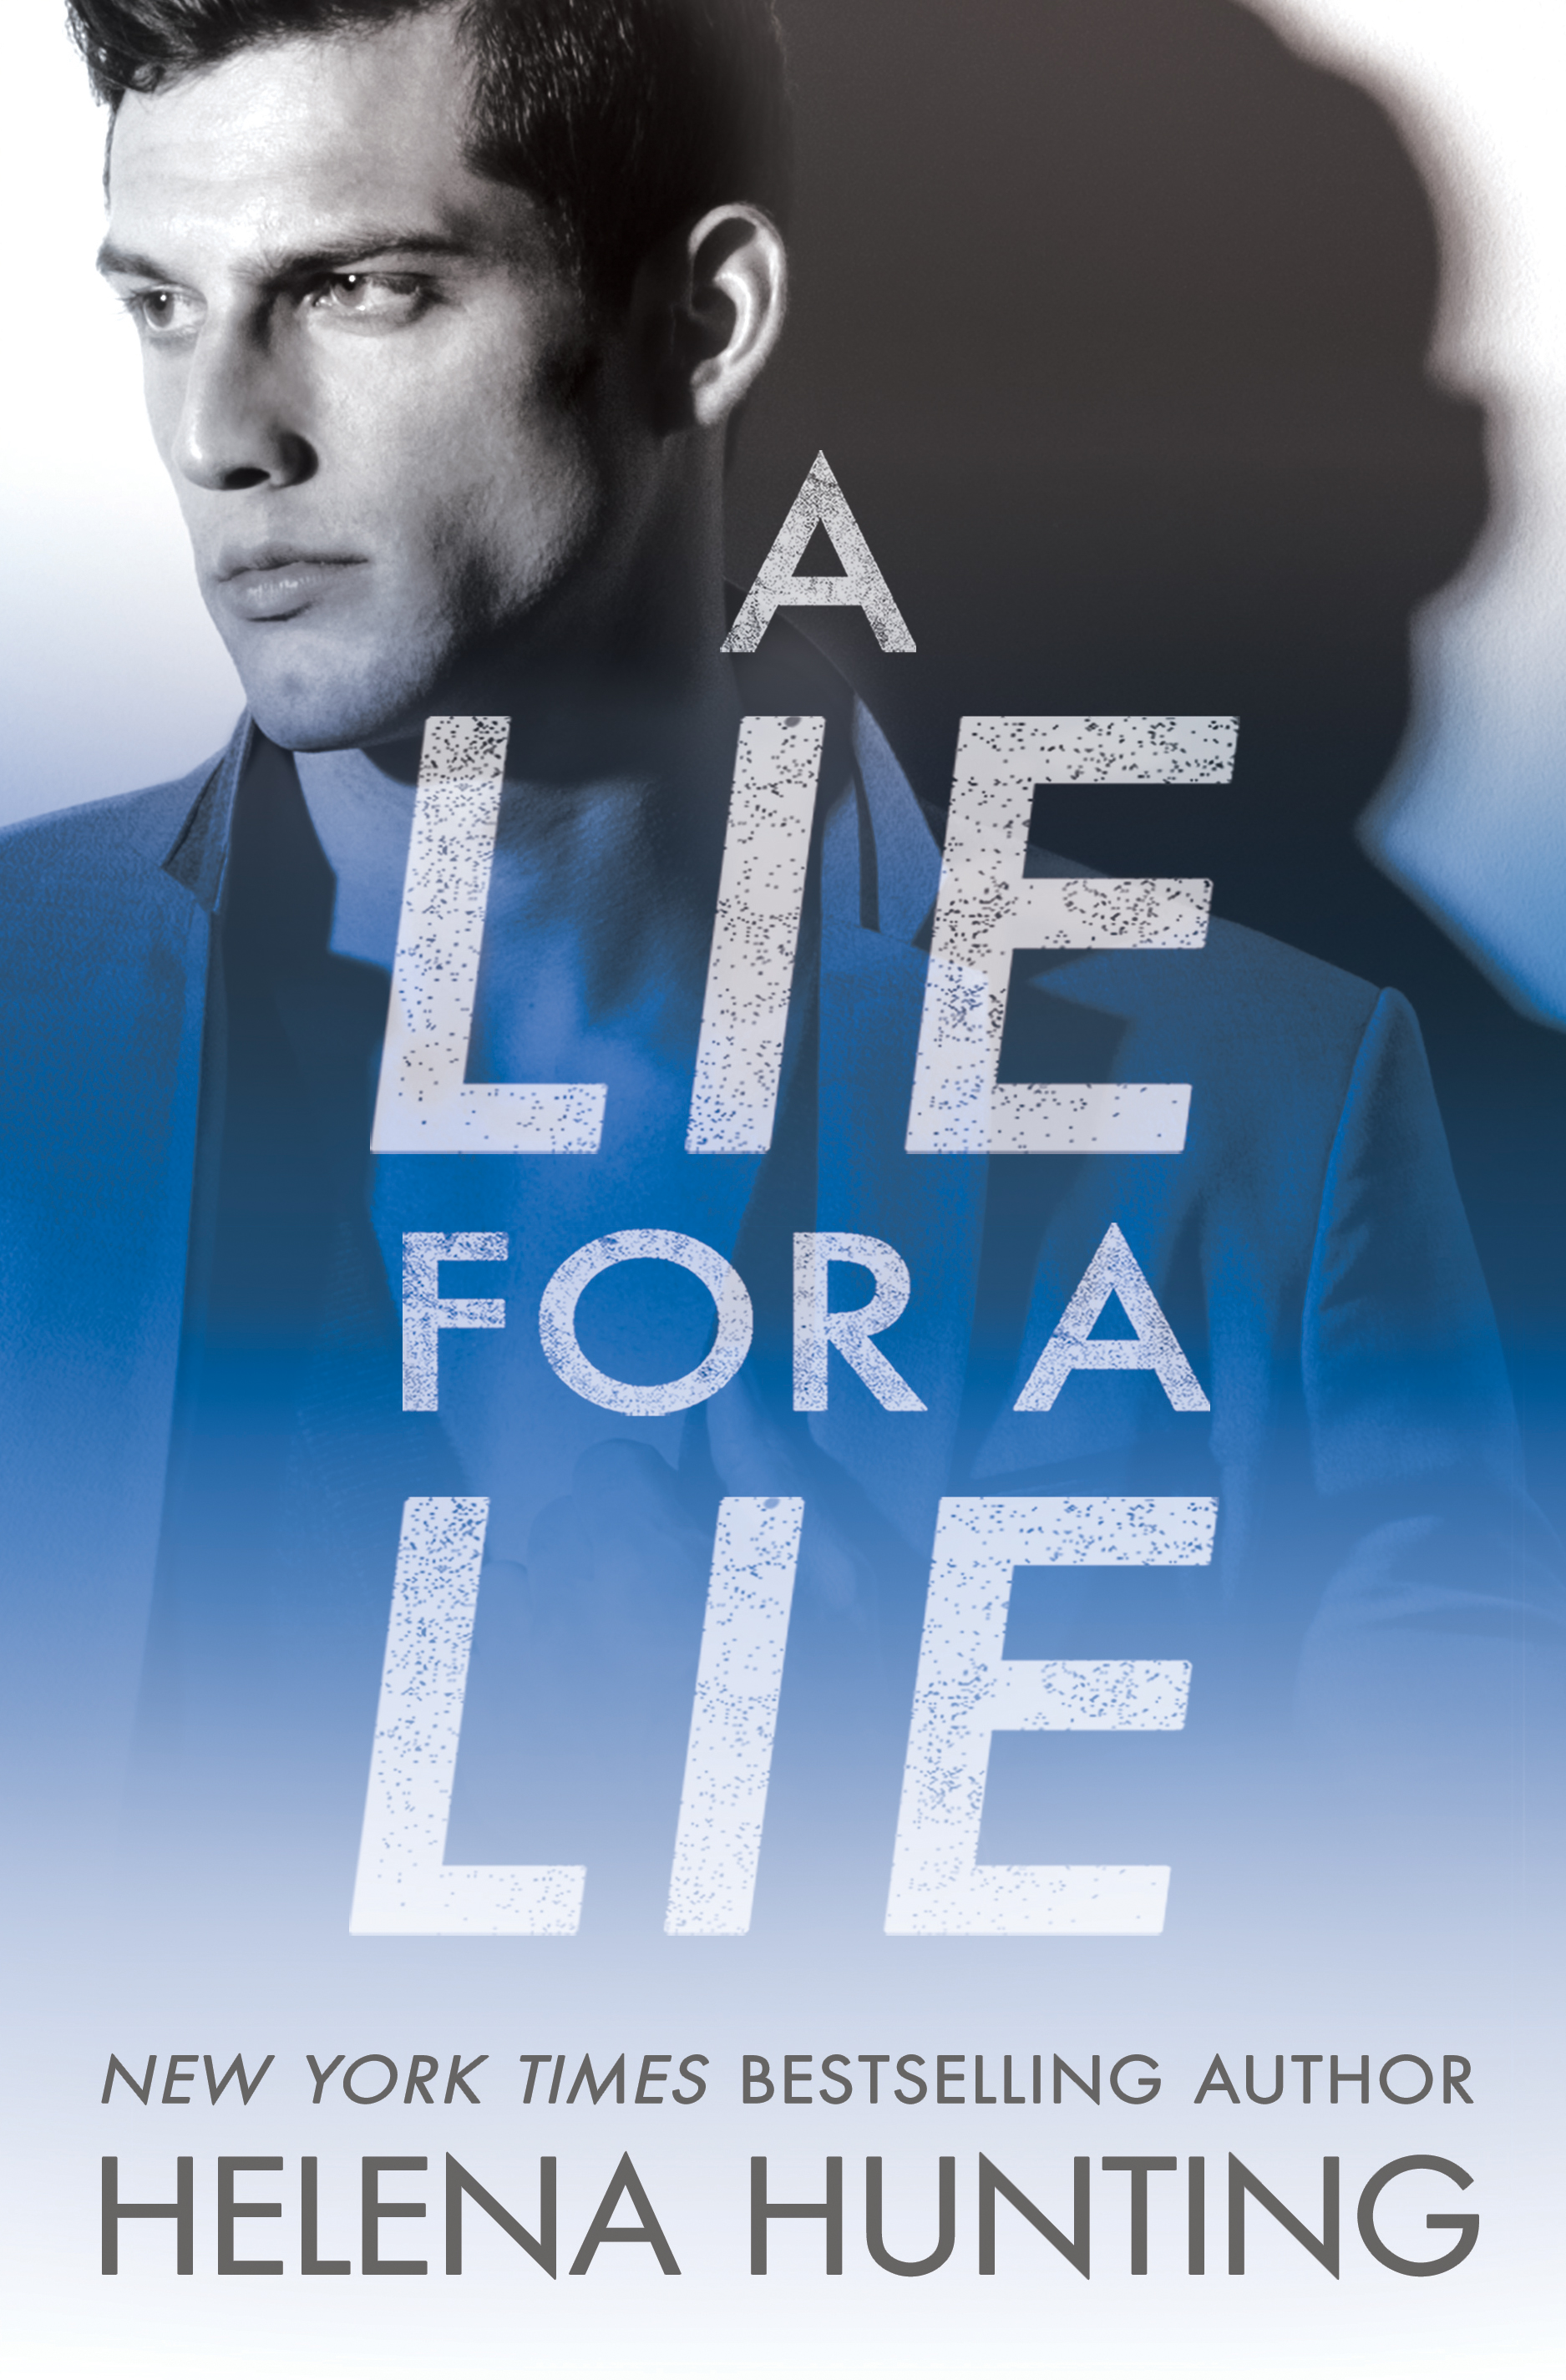 A Lie for a Lie by Helena Hunting Release Blitz & Review